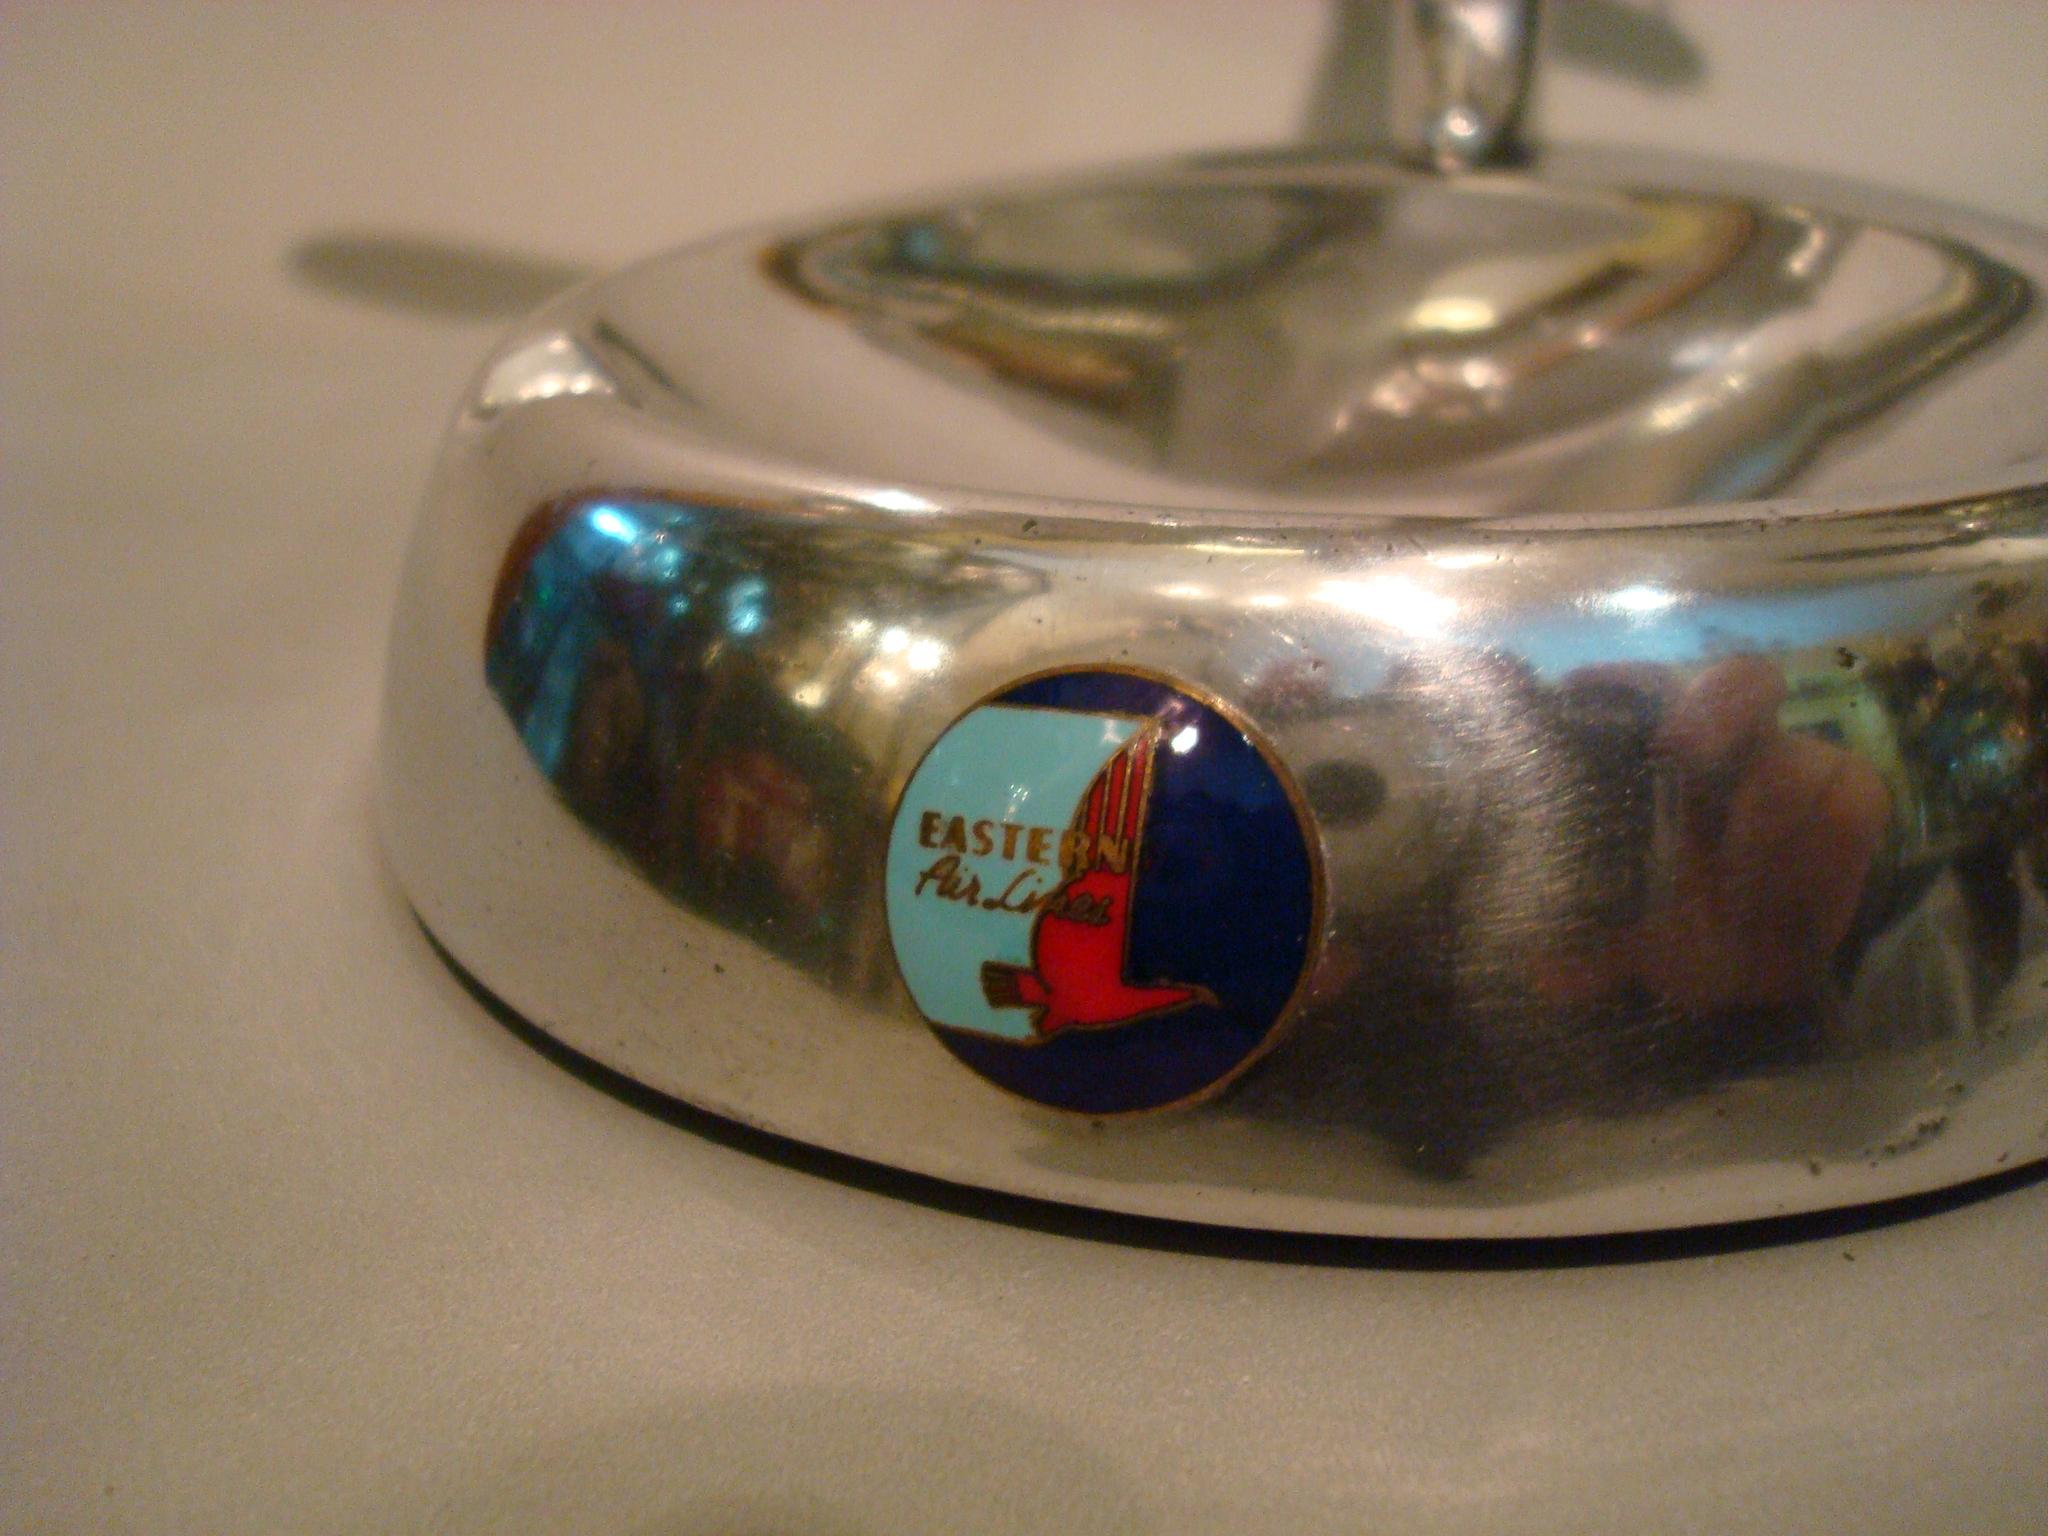 Eastern Air Lines Constellation Airplane Desk Model Ashtray, 1950s 1